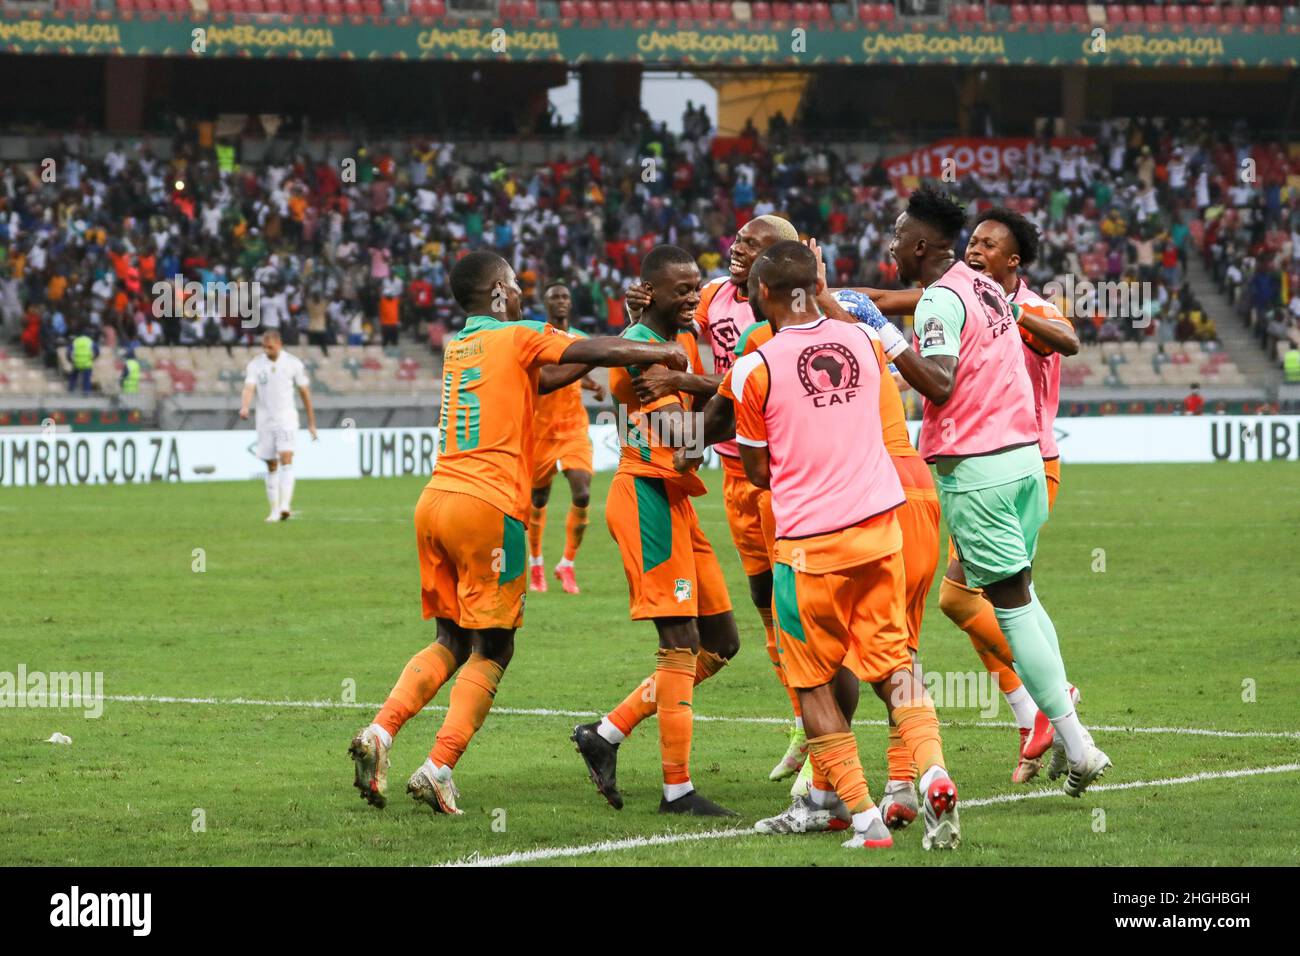 Douala, Cameroon. 20th Jan, 2022. Douala, CAMEROON - JANUARY 20: Nicolas Pepe of Ivory Coast celebrates with Max Gradel during the Africa Cup of Nations group E match between Ivory Coast and Algeria at Stade de Japoma on January 20 2022 in Douala, Cameroon. (Photo by SF) Credit: Sebo47/Alamy Live News Stock Photo